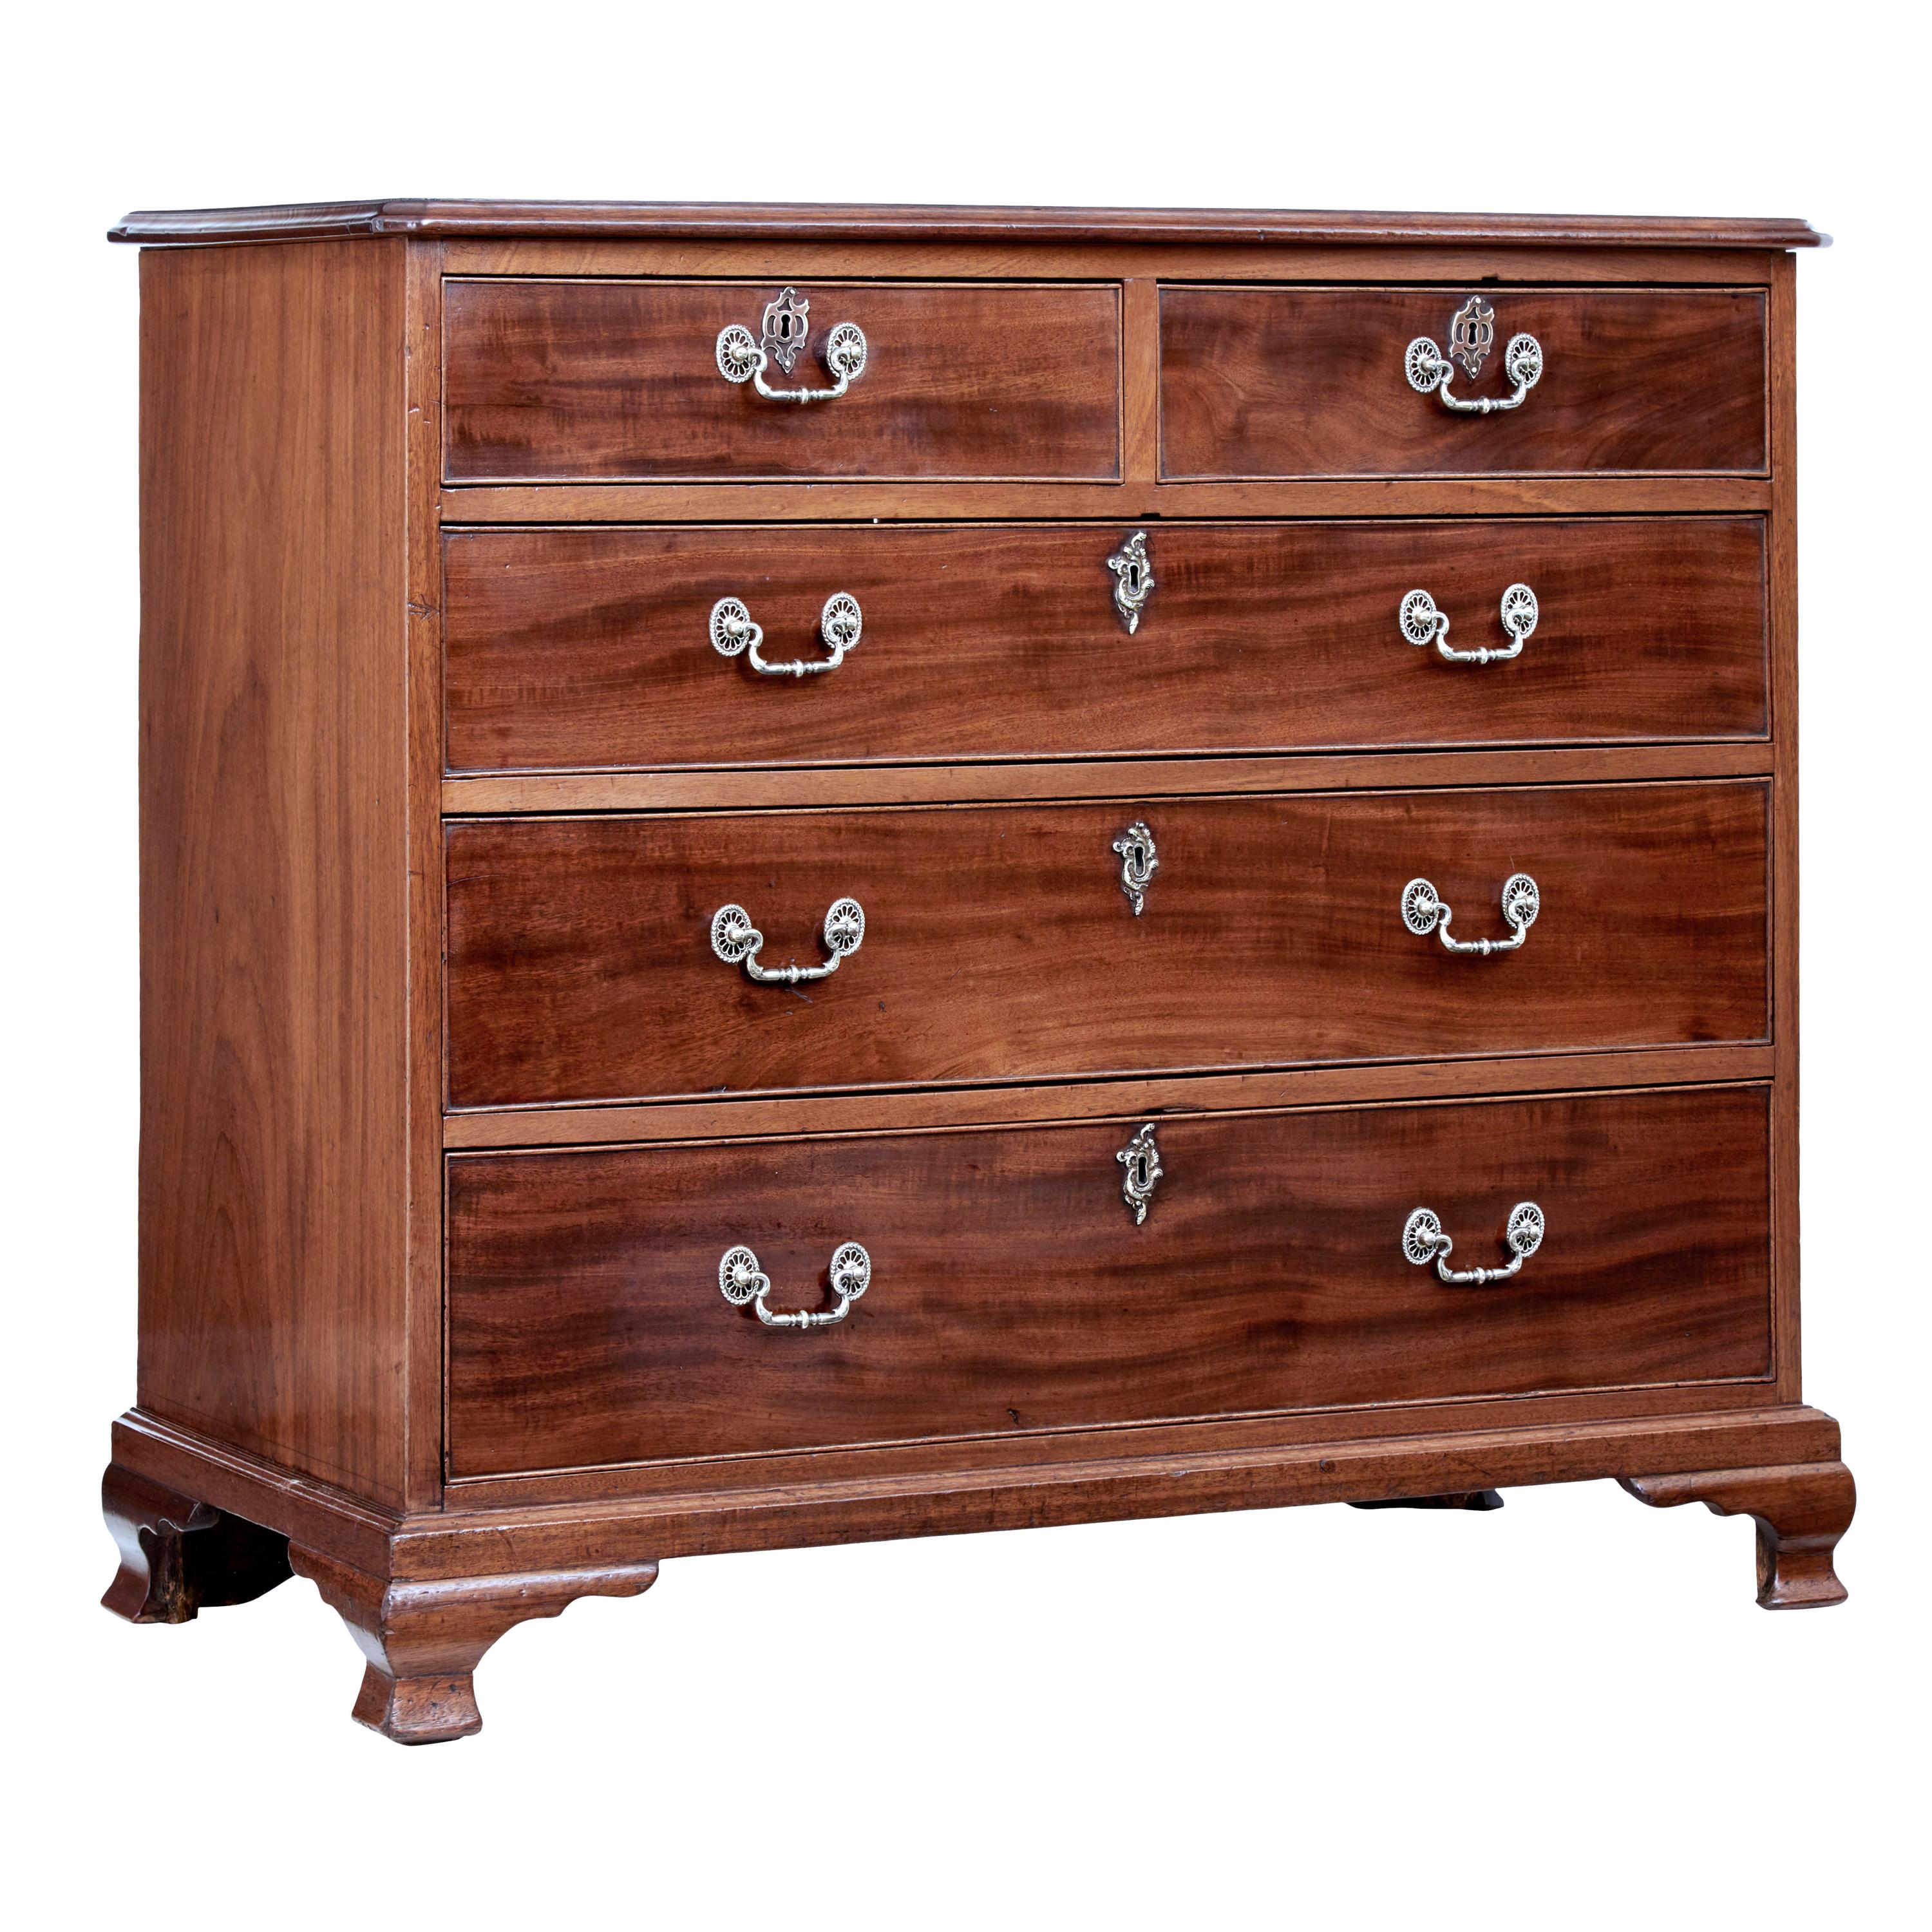 Mid-19th Century Mahogany Chest of Drawers